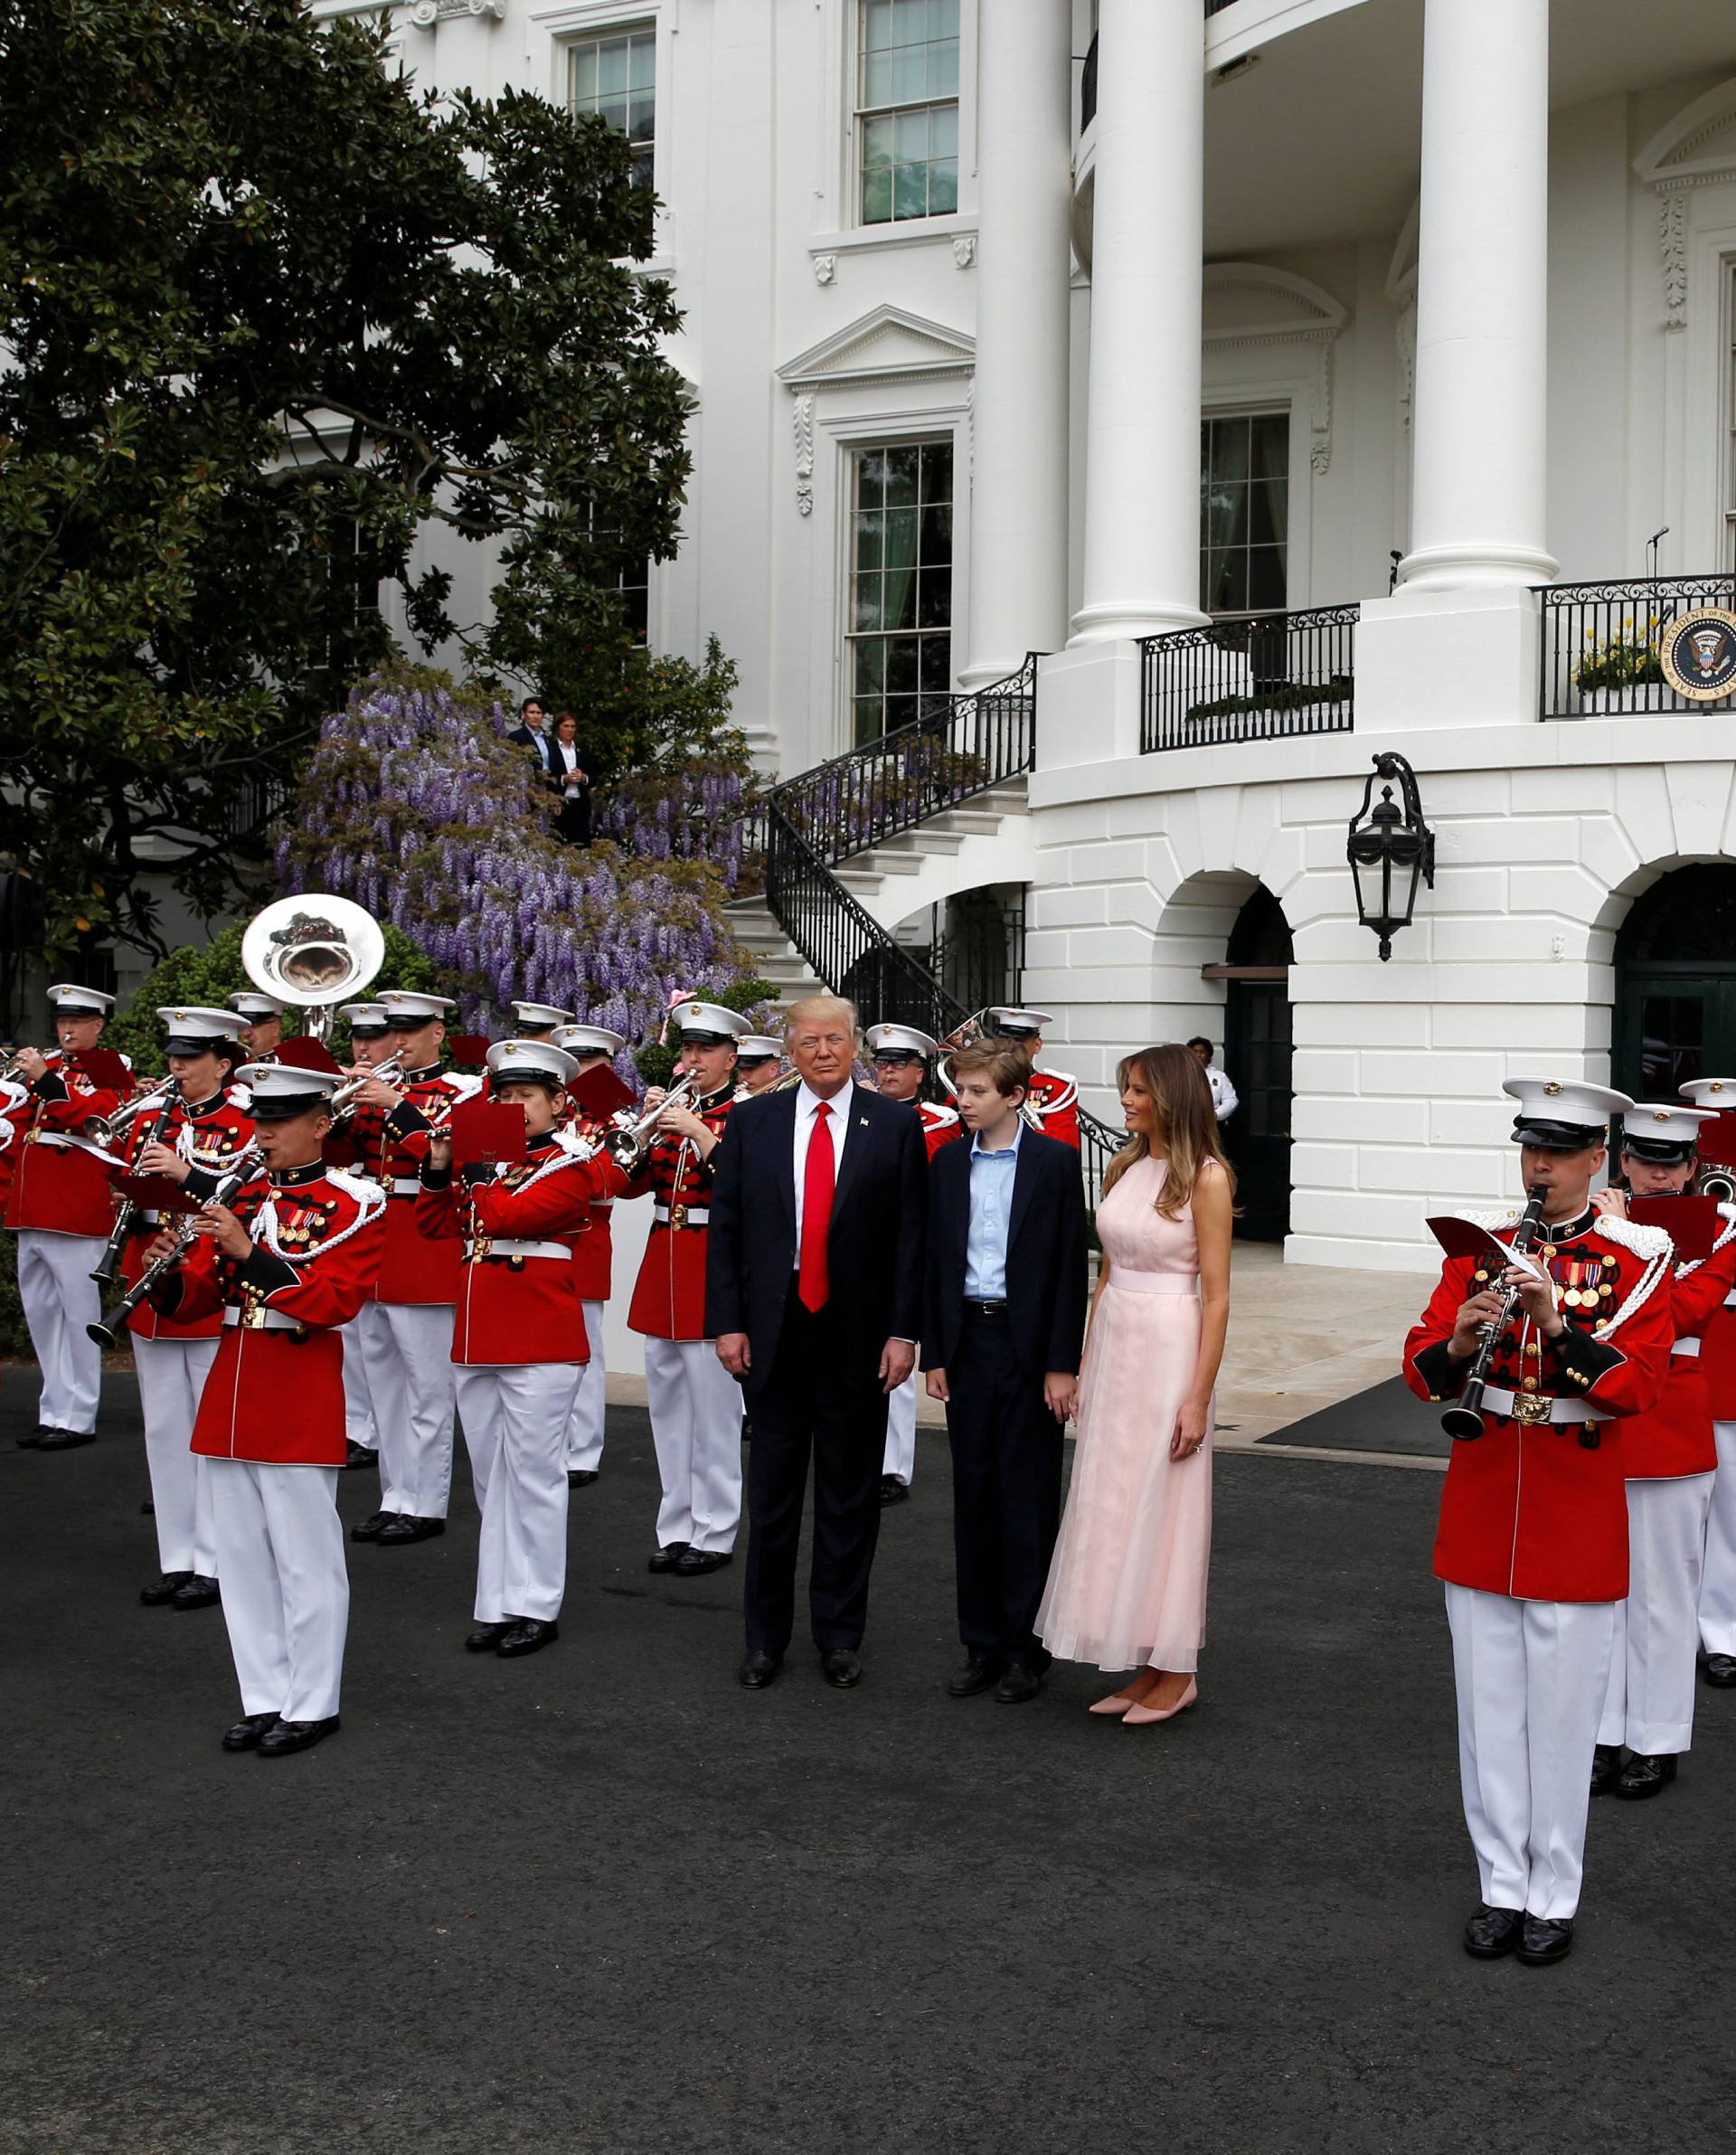 U.S. President Donald Trump, U.S. first lady Melania Trump and their son Barron listen as a military band plays during the 139th annual White House Easter Egg Roll on the South Lawn of the White House in Washington